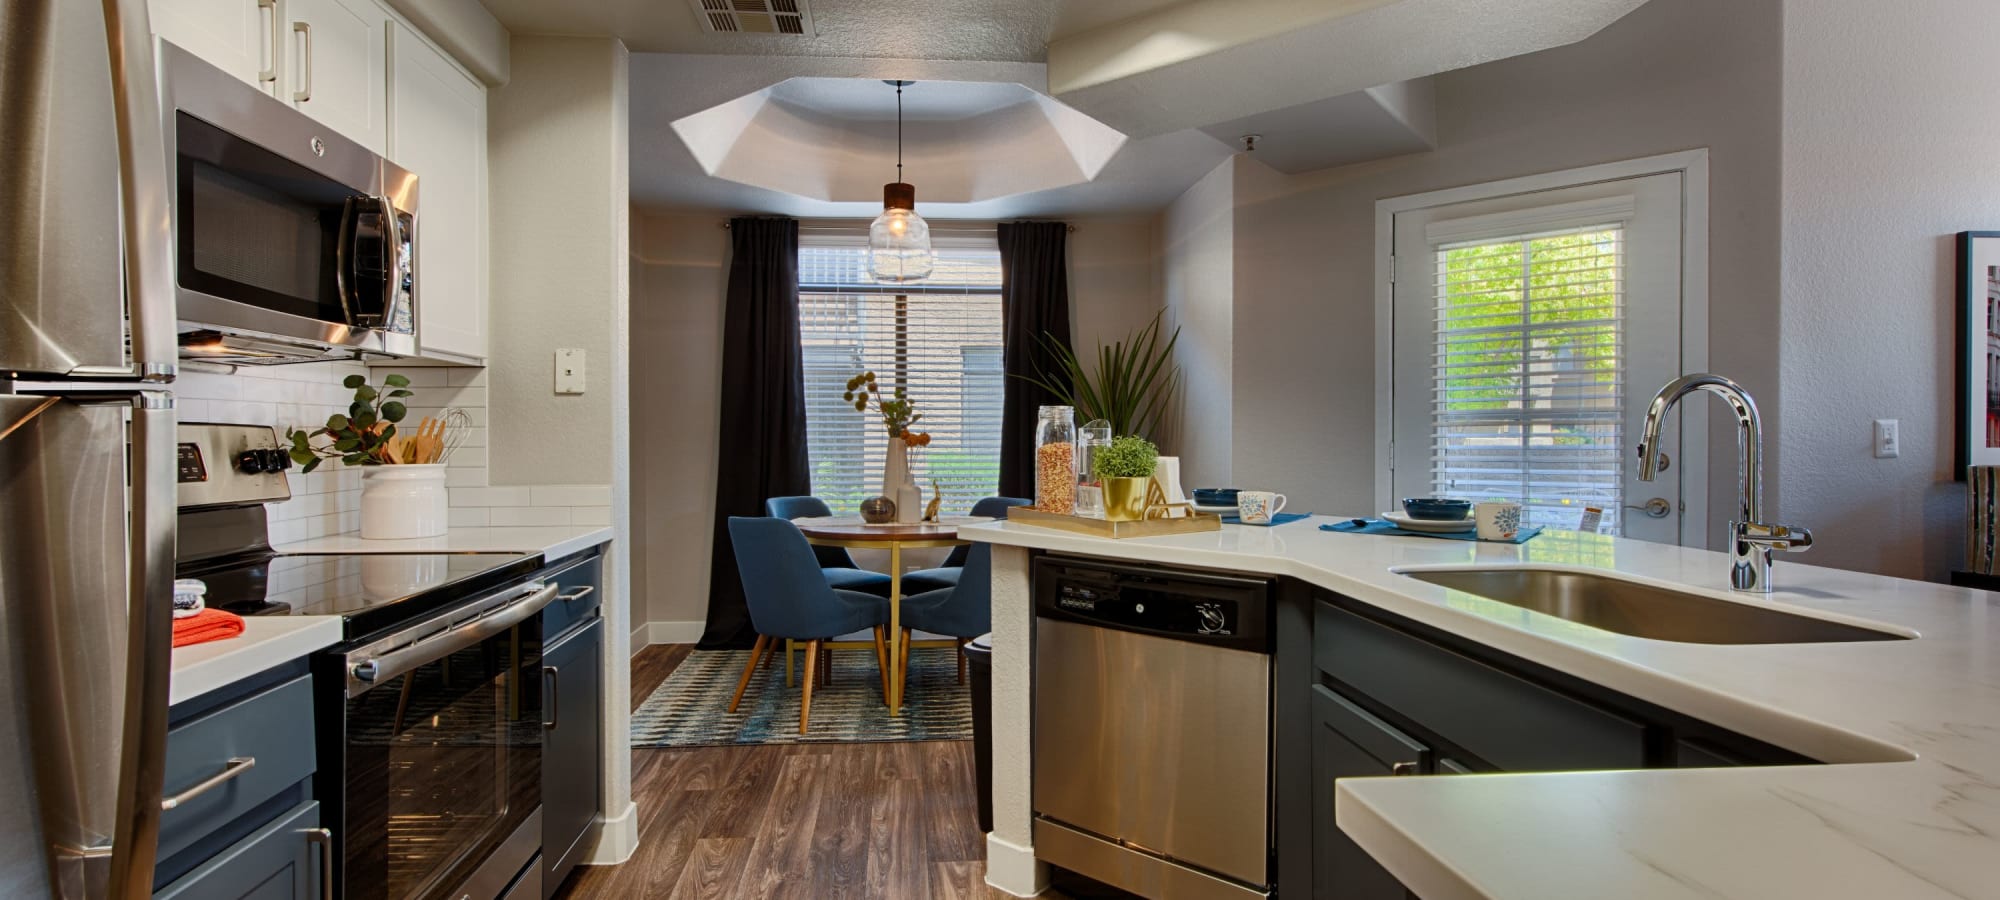 Kitchen with wood flooring and granite countertops at The Ventura in Chandler, Arizona